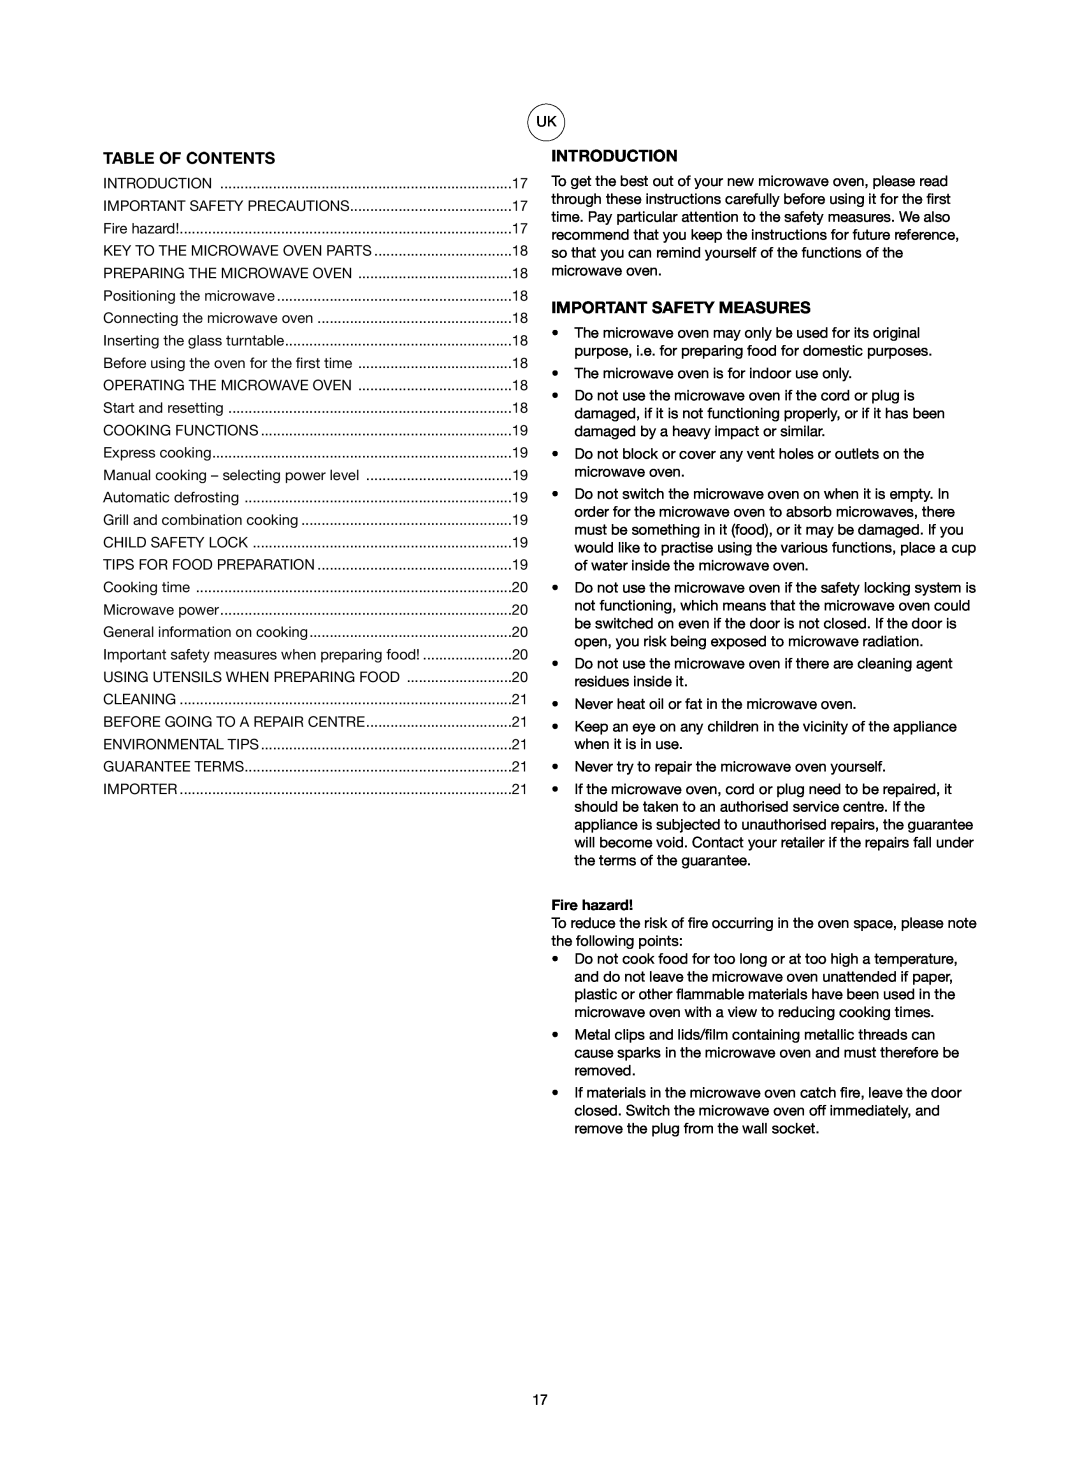 Melissa 753-084 manual Table Of Contents, Introduction, Important Safety Measures, Fire hazard 